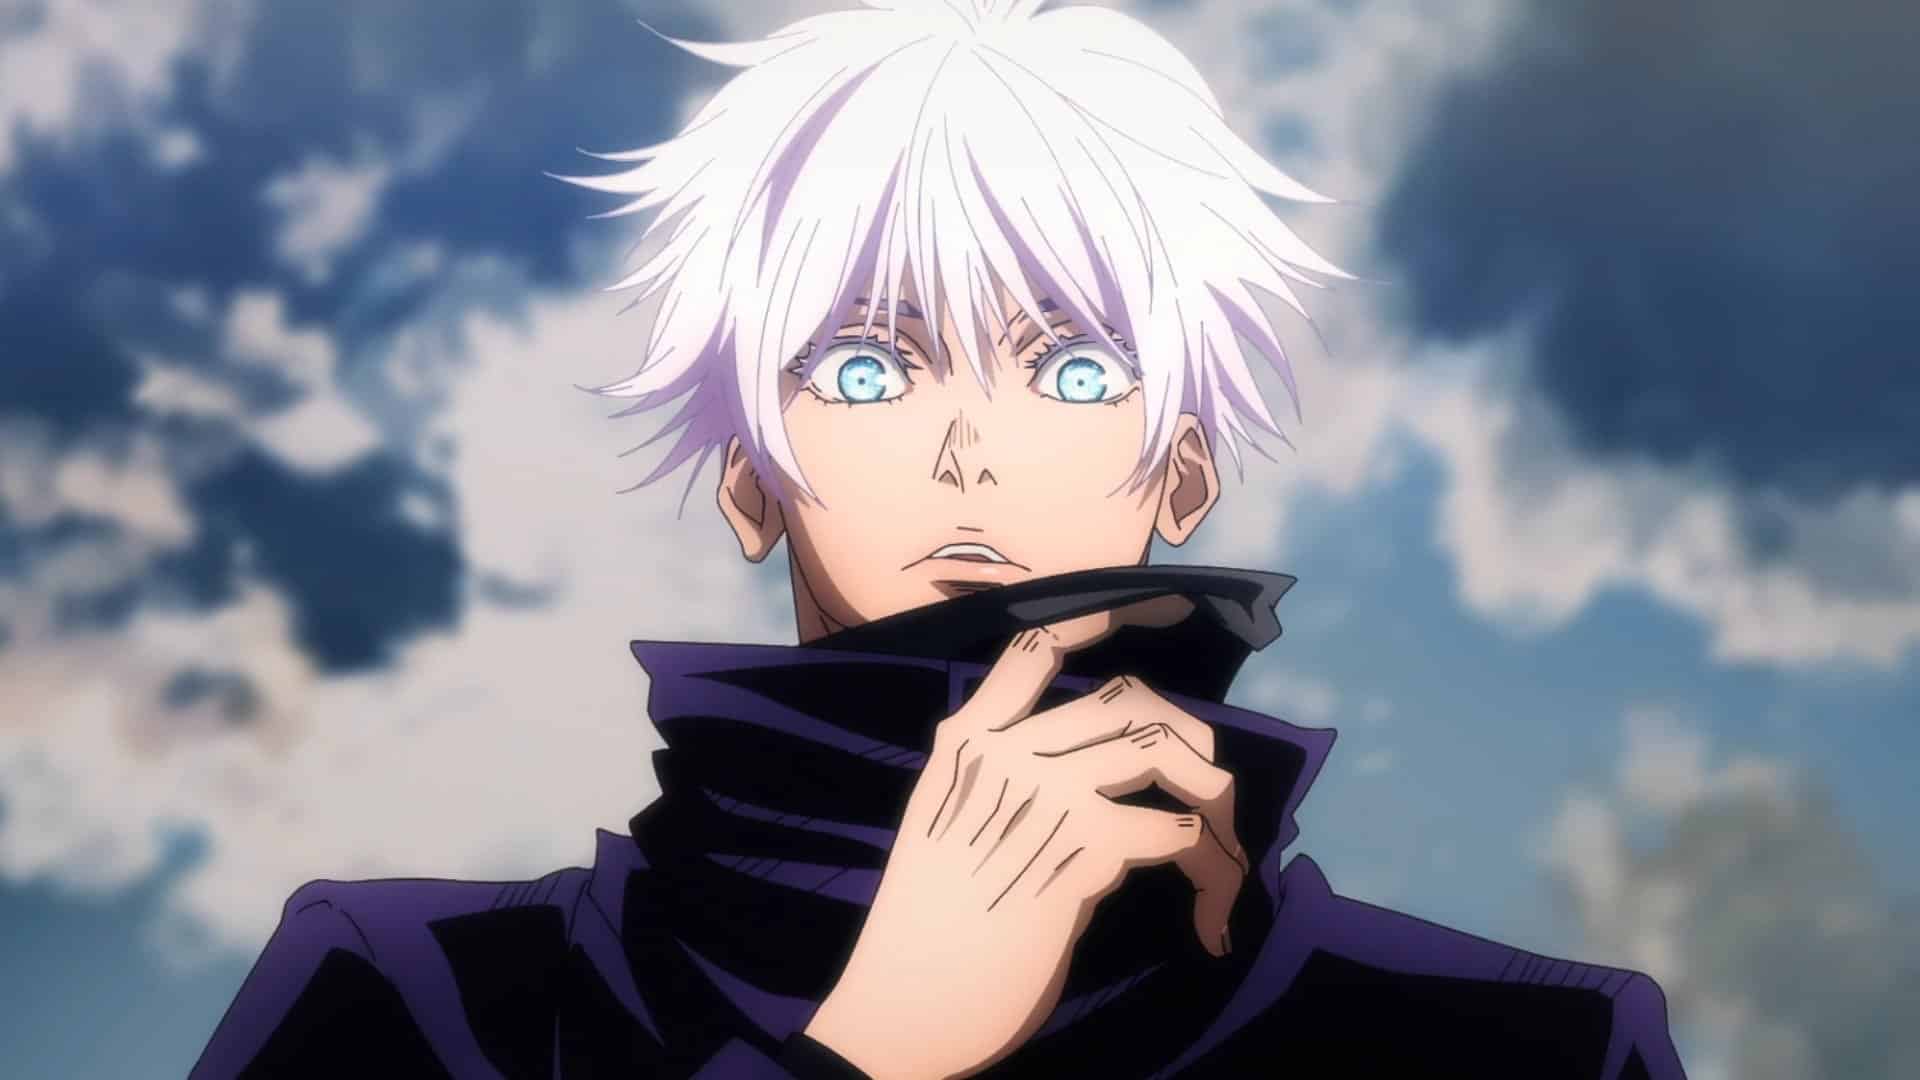 Which WhiteHaired Anime Character Is The Most Iconic